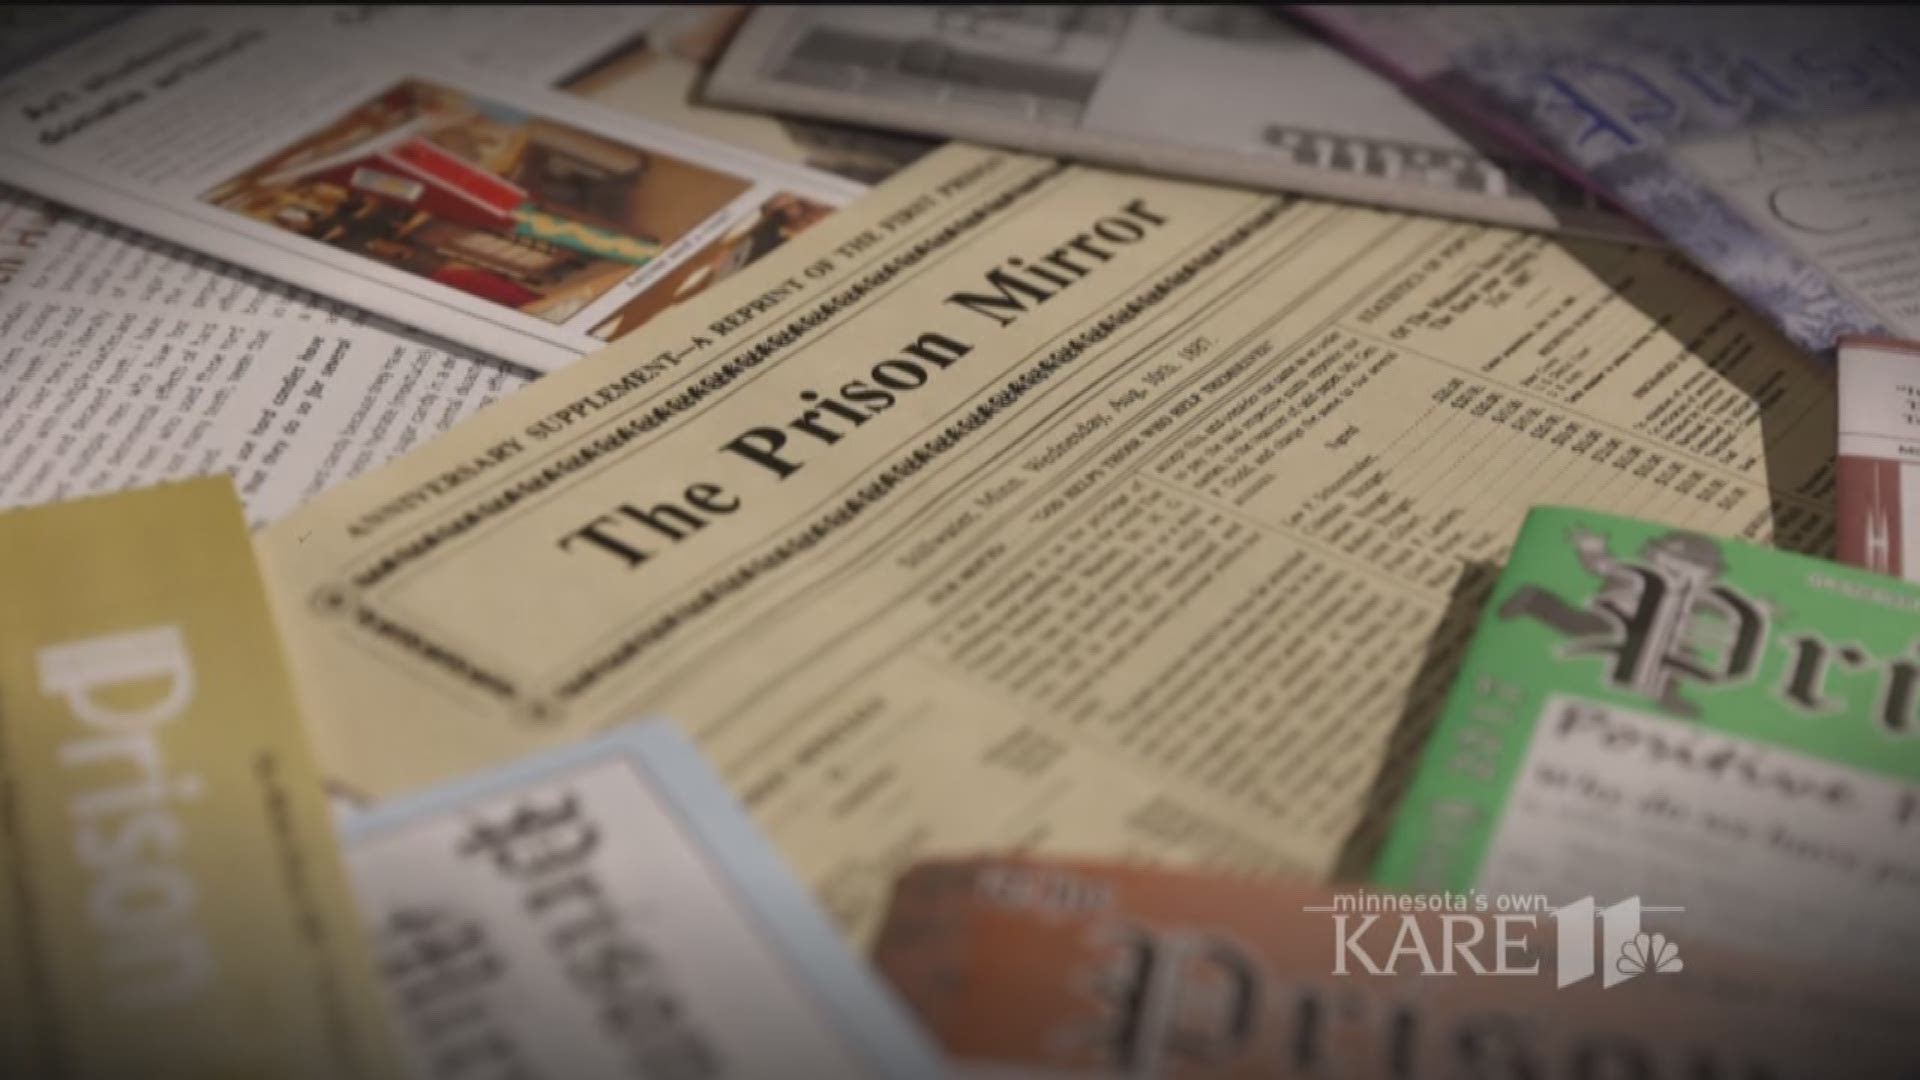 BTN11: 'The Prison Mirror' is the longest running jail paper in the U.S.